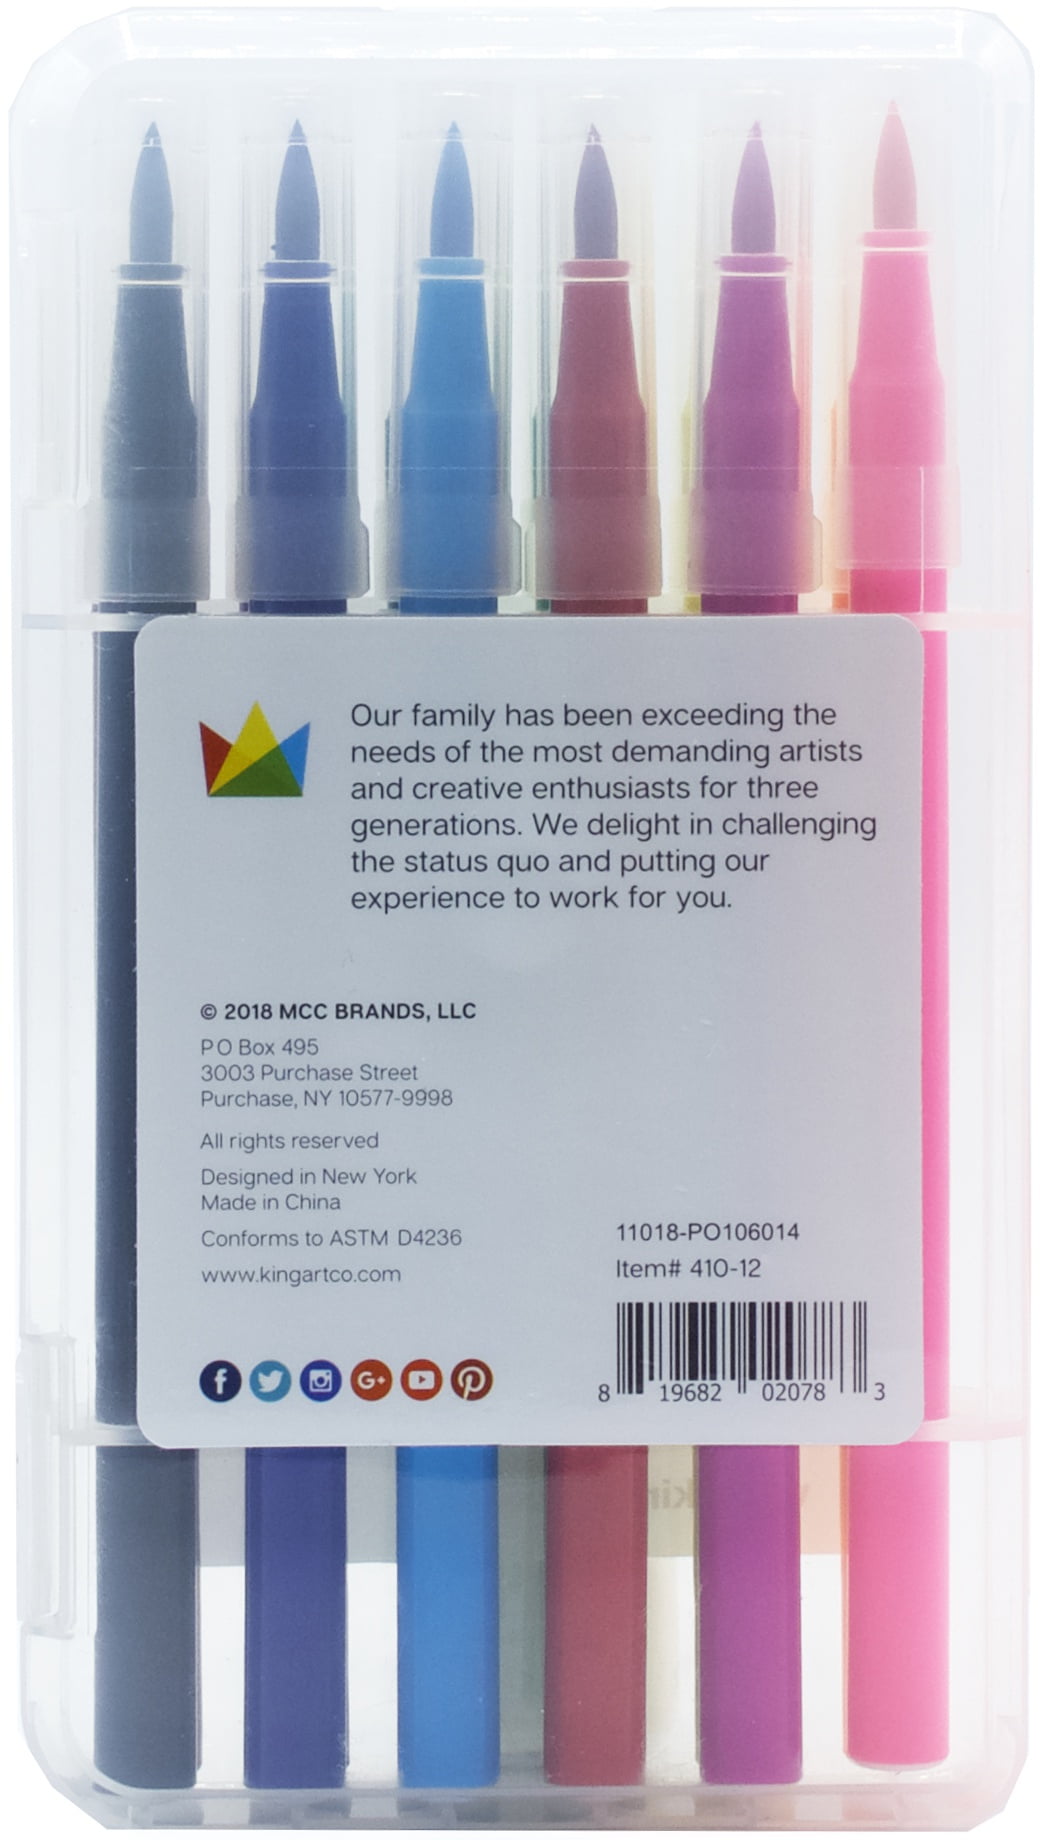 10 Aquamarkers Dual Tip With Storage, Aquarelle Markers, US Edition  Watercolour Markers, Water Color Effect Markers, Coloring Markers Set 